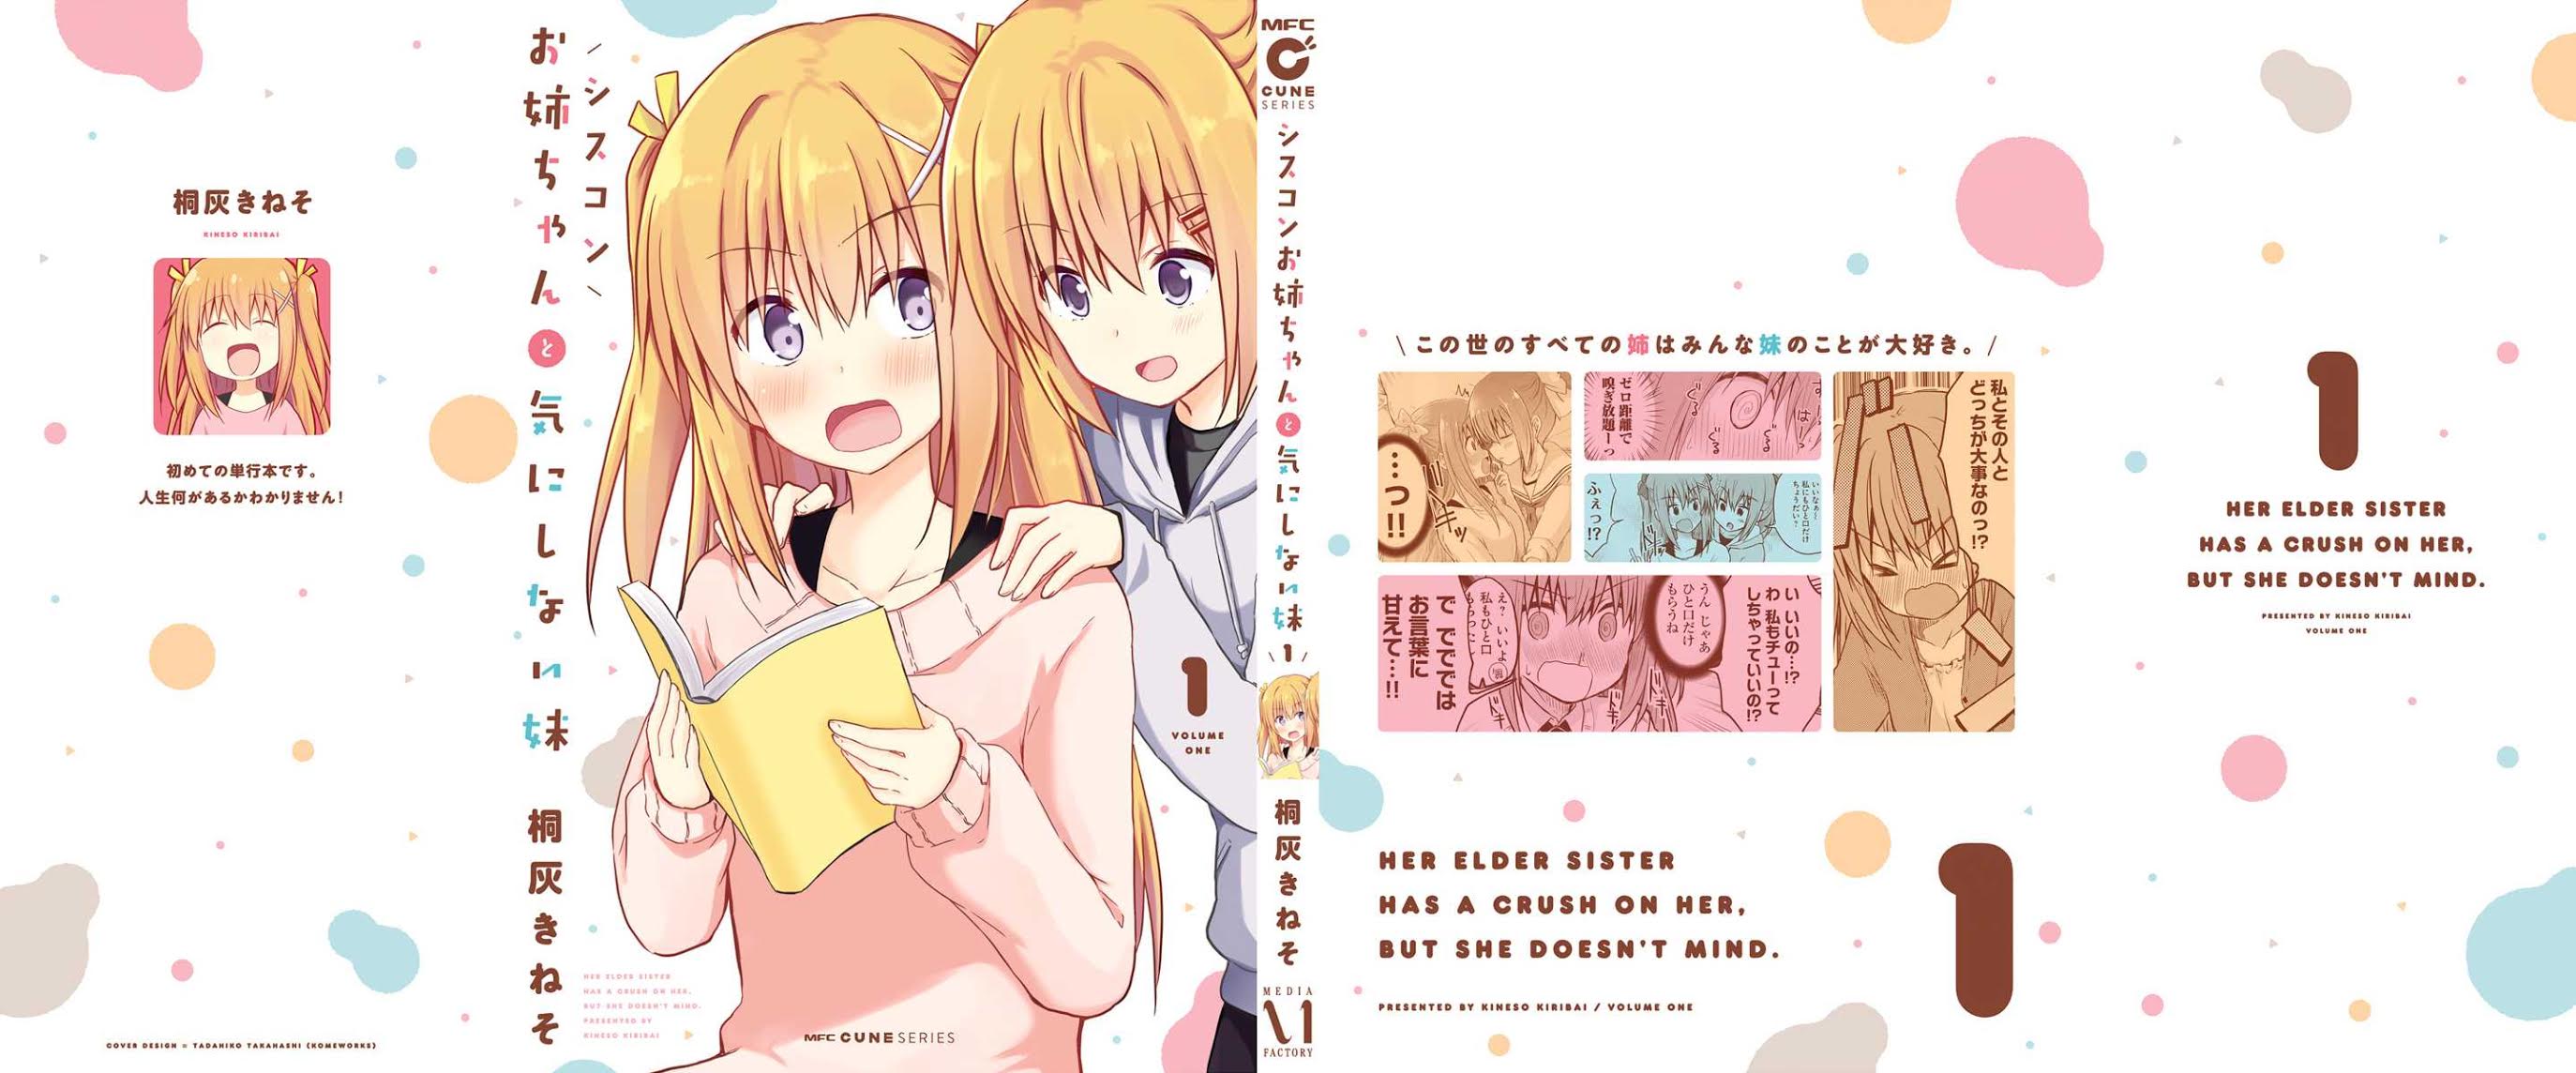 Her Elder Sister Has a Crush on Her, But She Doesn't Mind Chapter 8: Siscon Elder Sister and a Friend Acting Strangely, and a Little Sister Playing Social Games ②